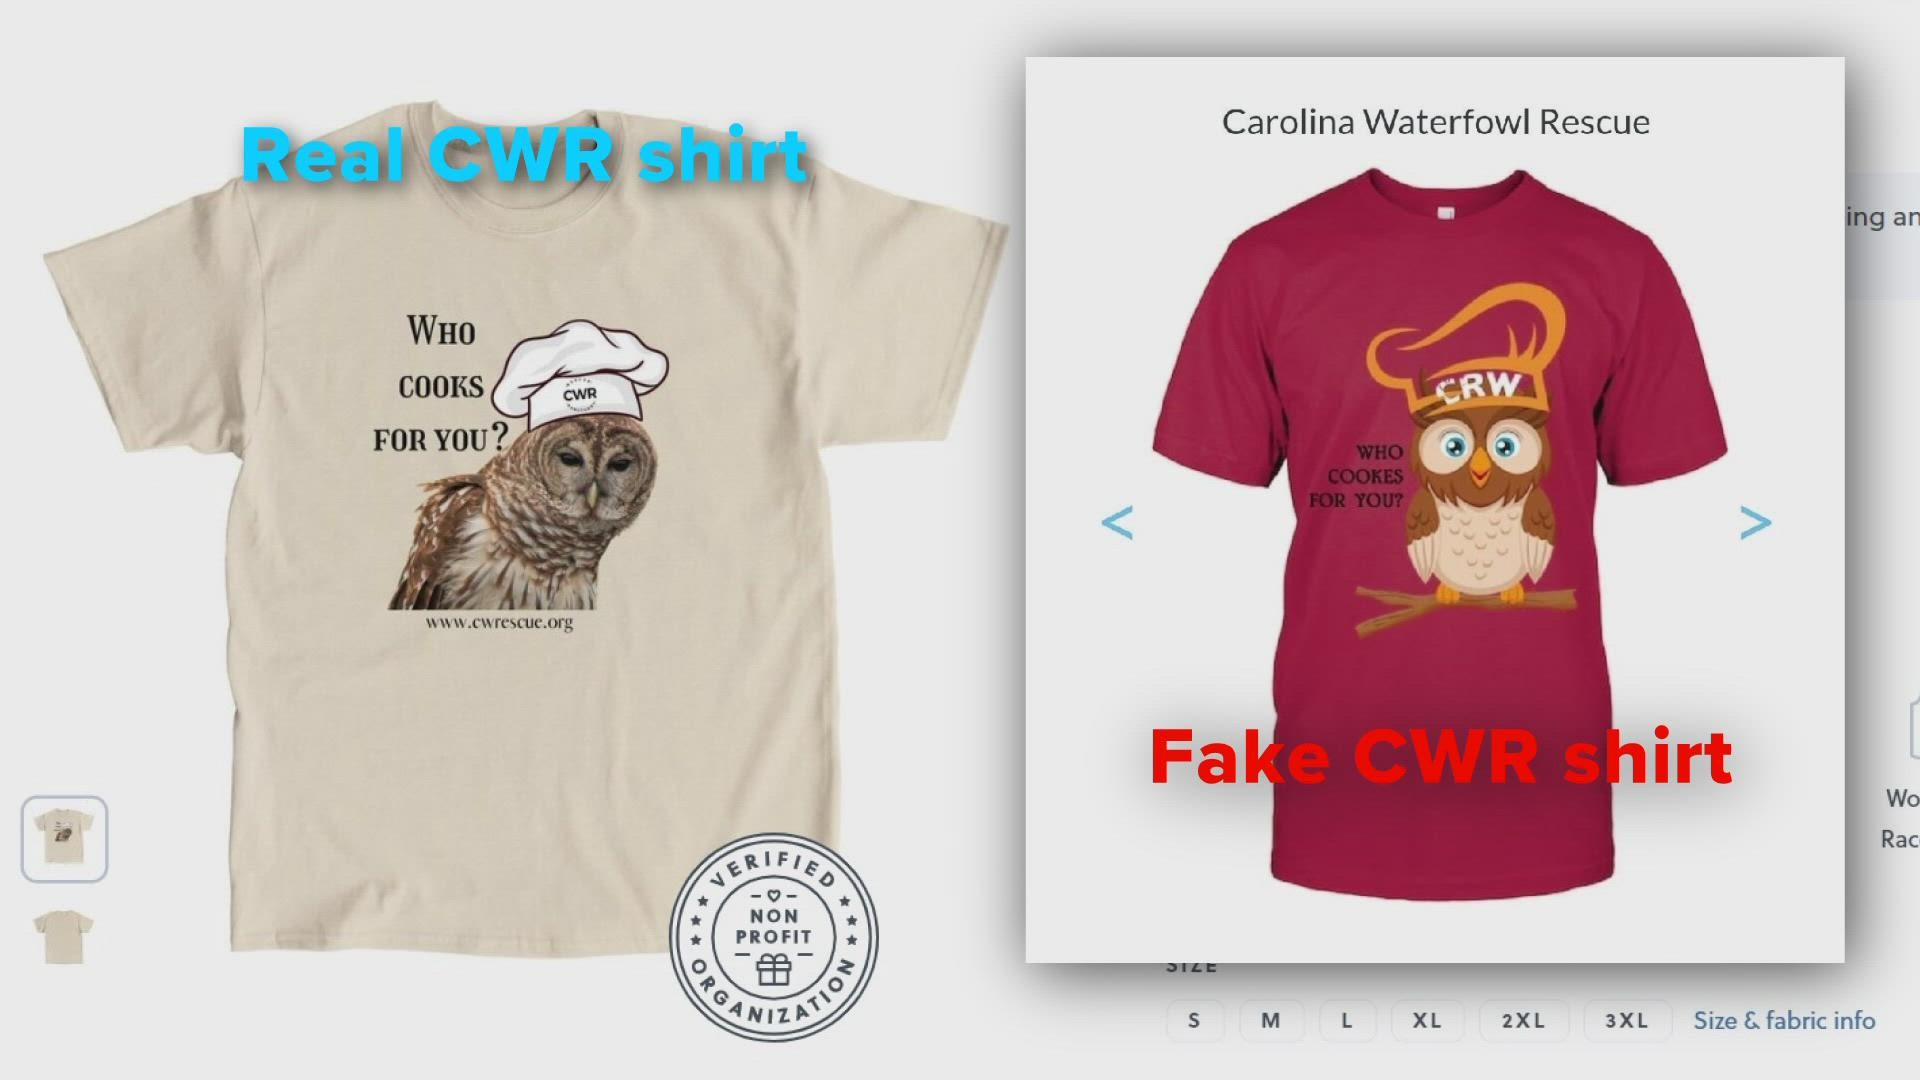 A fake online store is diverting real money away from Carolina Waterfowl Rescue.